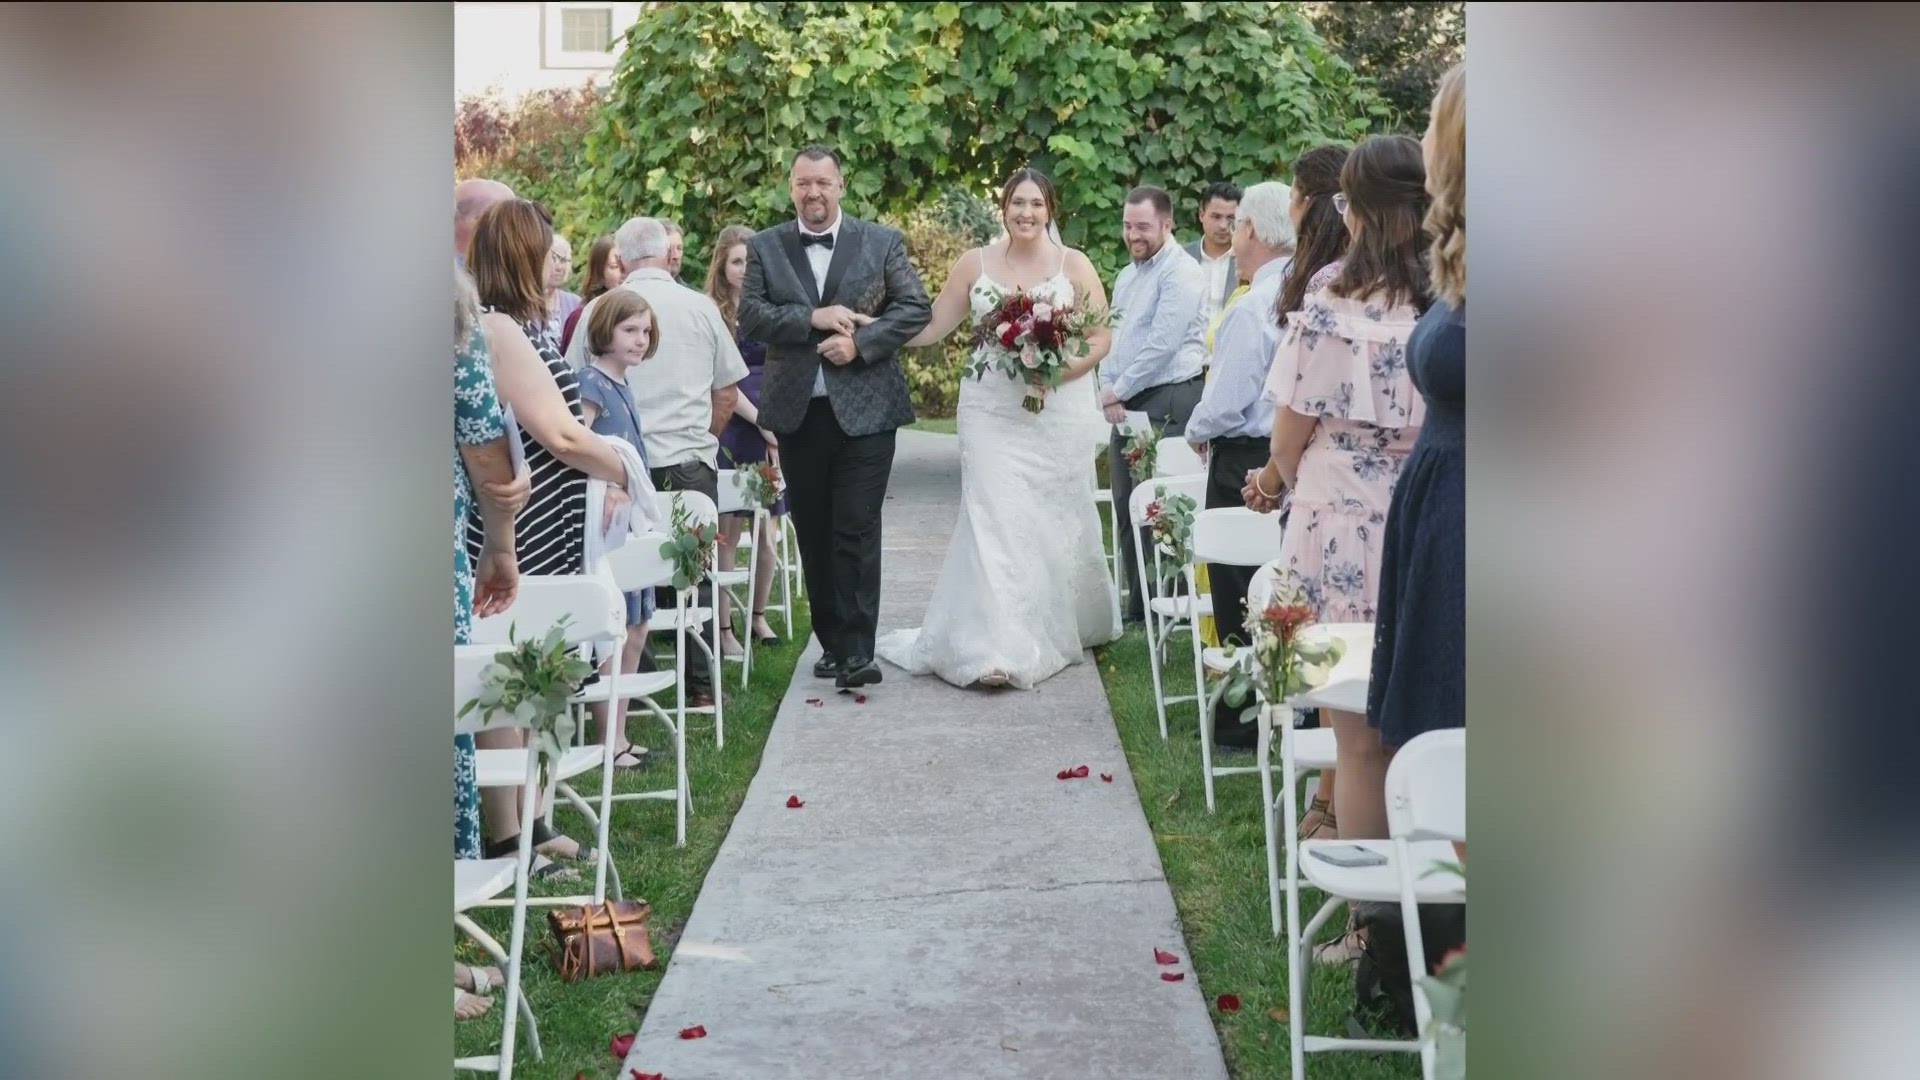 Recently married Jennifer Bowerman discusses her wildest dreams of trading Taylor Swift tickets for a free wedding venue.